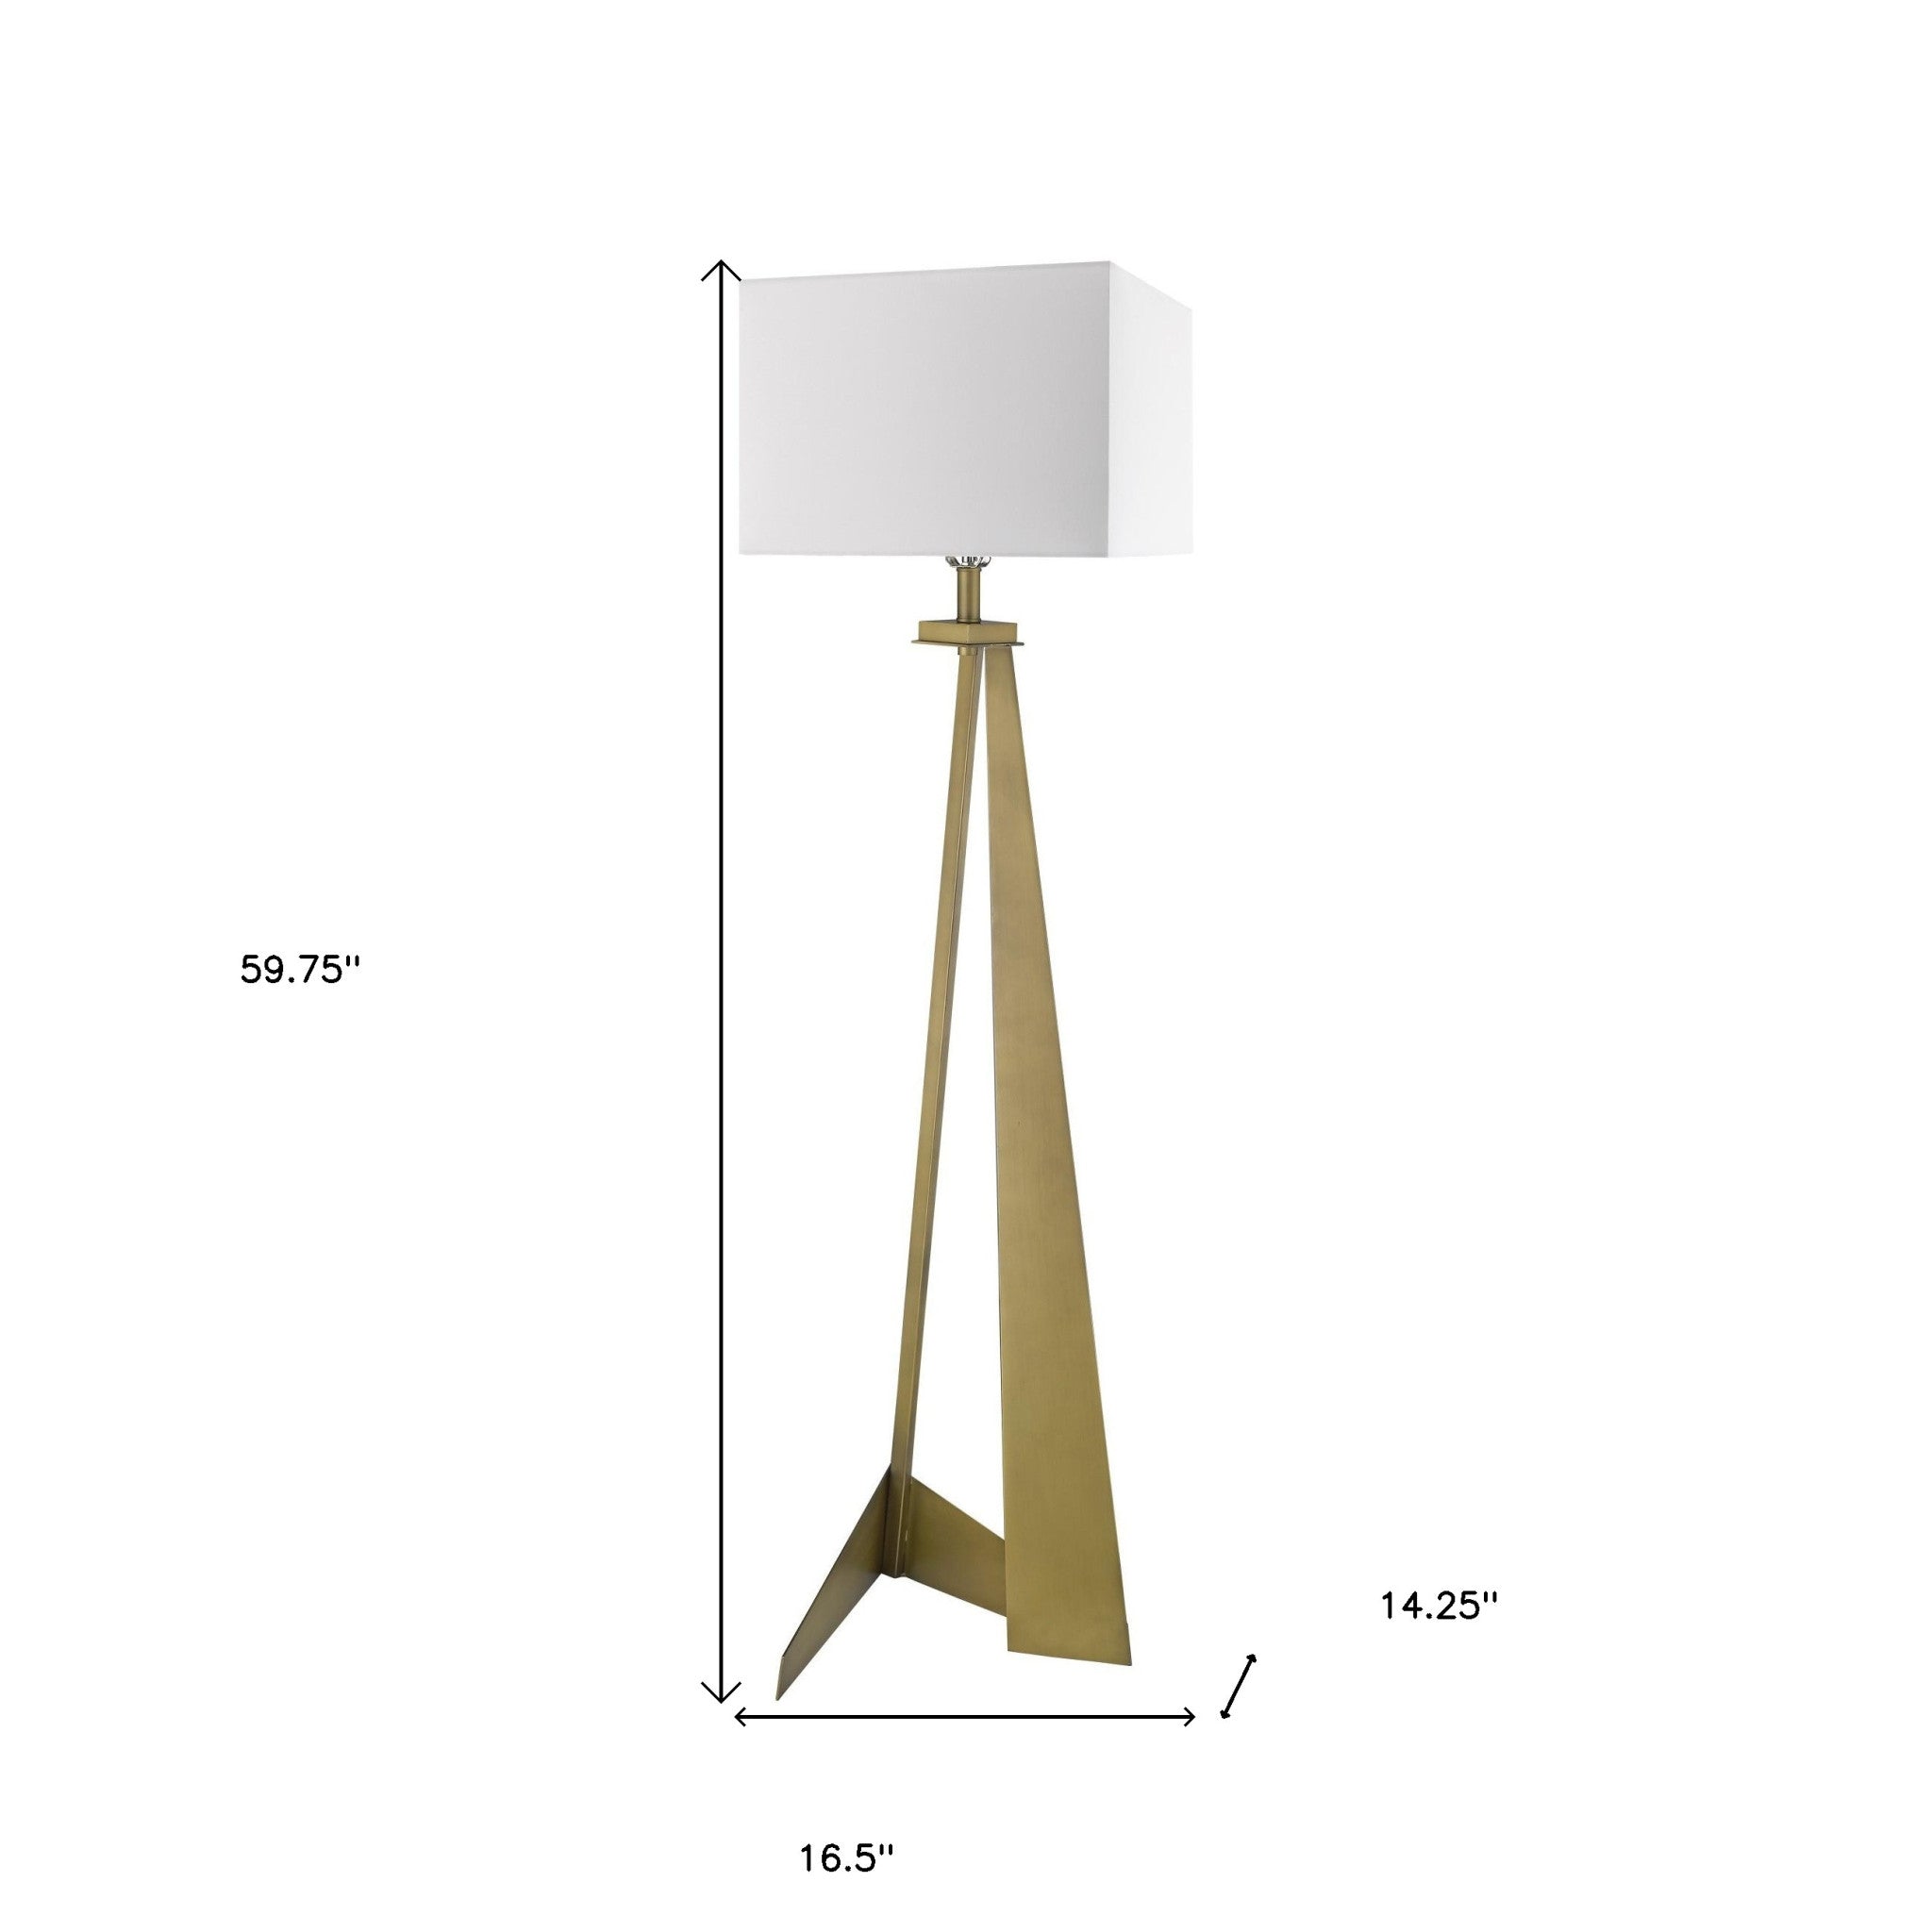 60" Brass Traditional Shaped Floor Lamp With White Novelty Shade